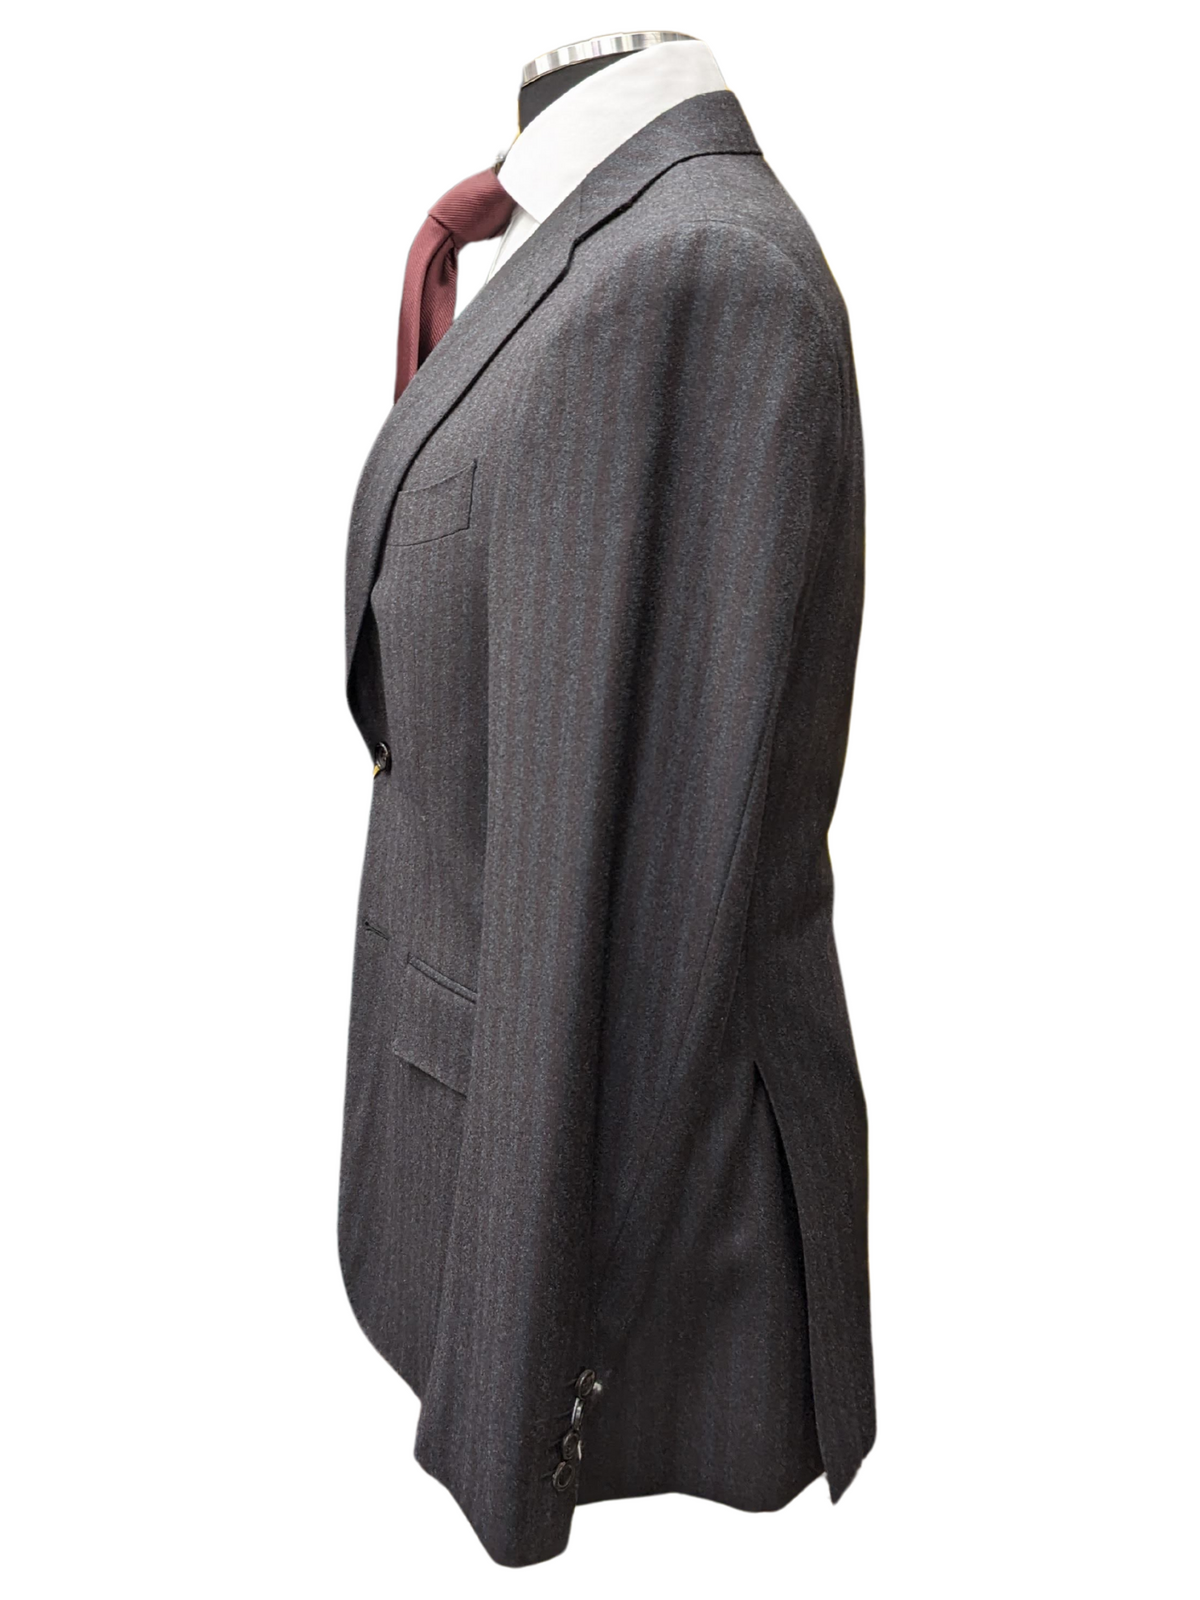 Canali 1934 Men&#39;s 40R Classic Fit Charcoal Gray Striped 100% Wool 2 Piece Suit